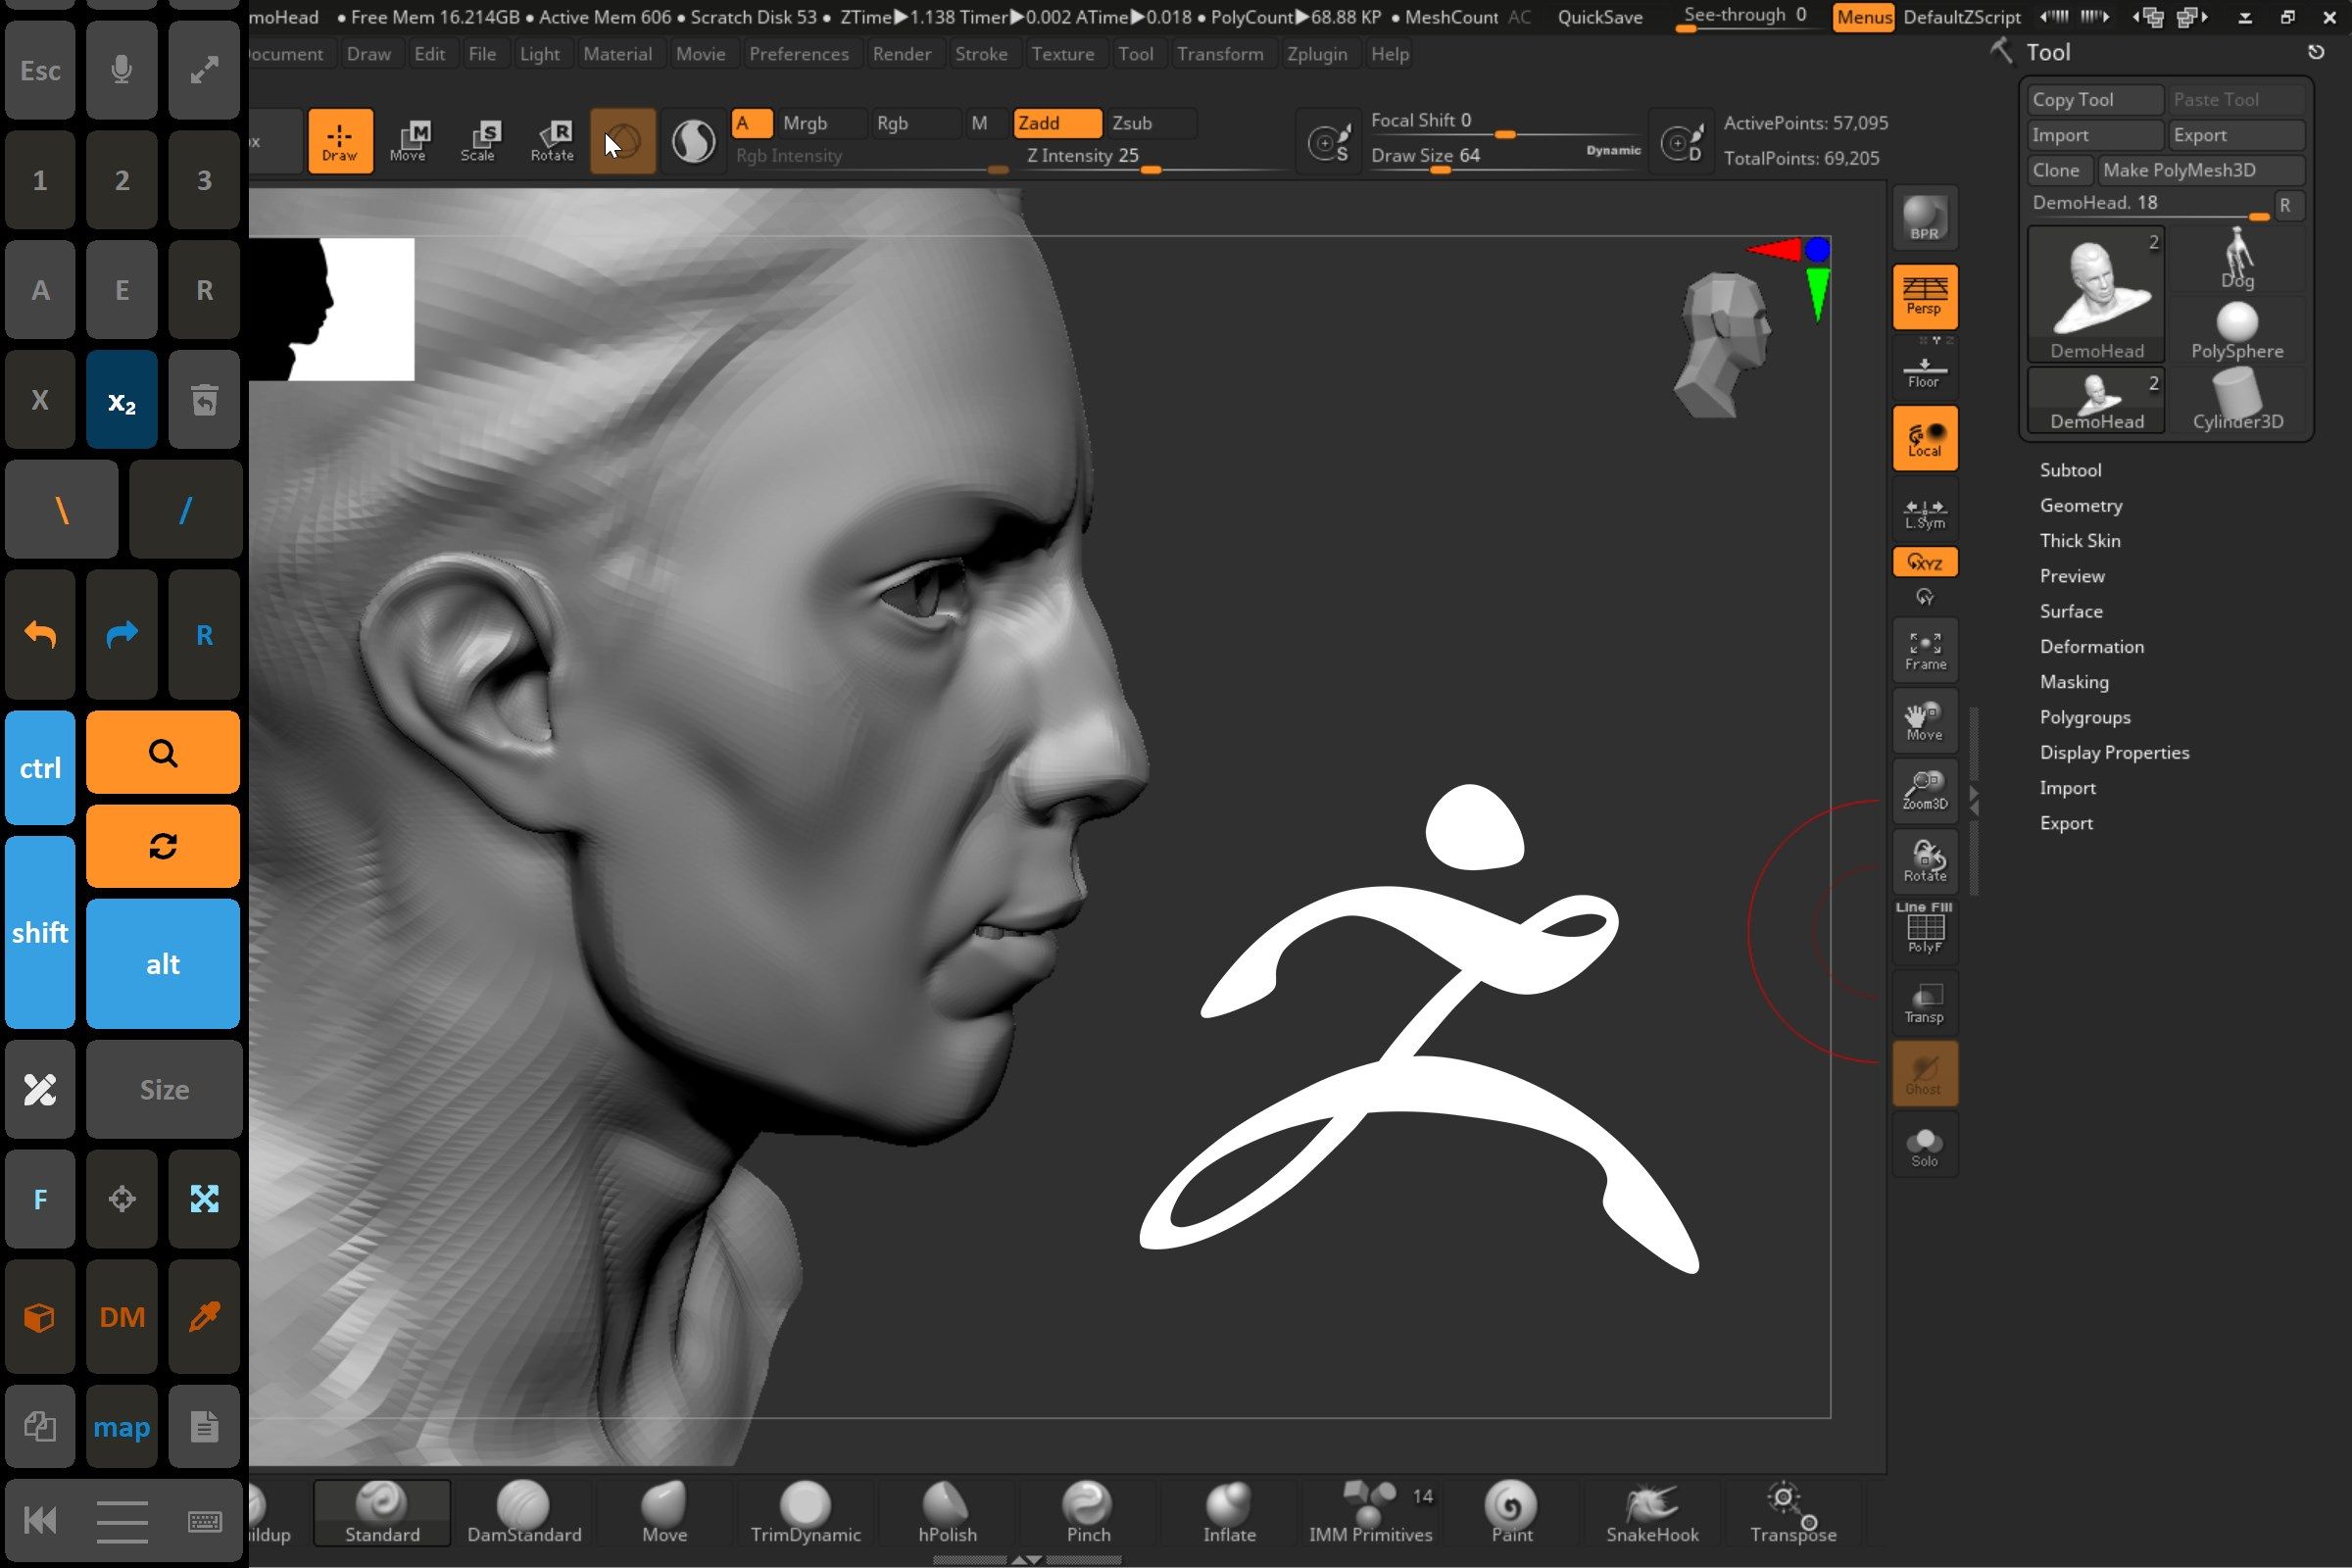 Zbrush works amazingly now. Choose WM_Event in Tablet settings for Zbrush to have perfect touch keyboard controls working. Zbrush on a Surface Pro or Windows tablet has NEVER been better.